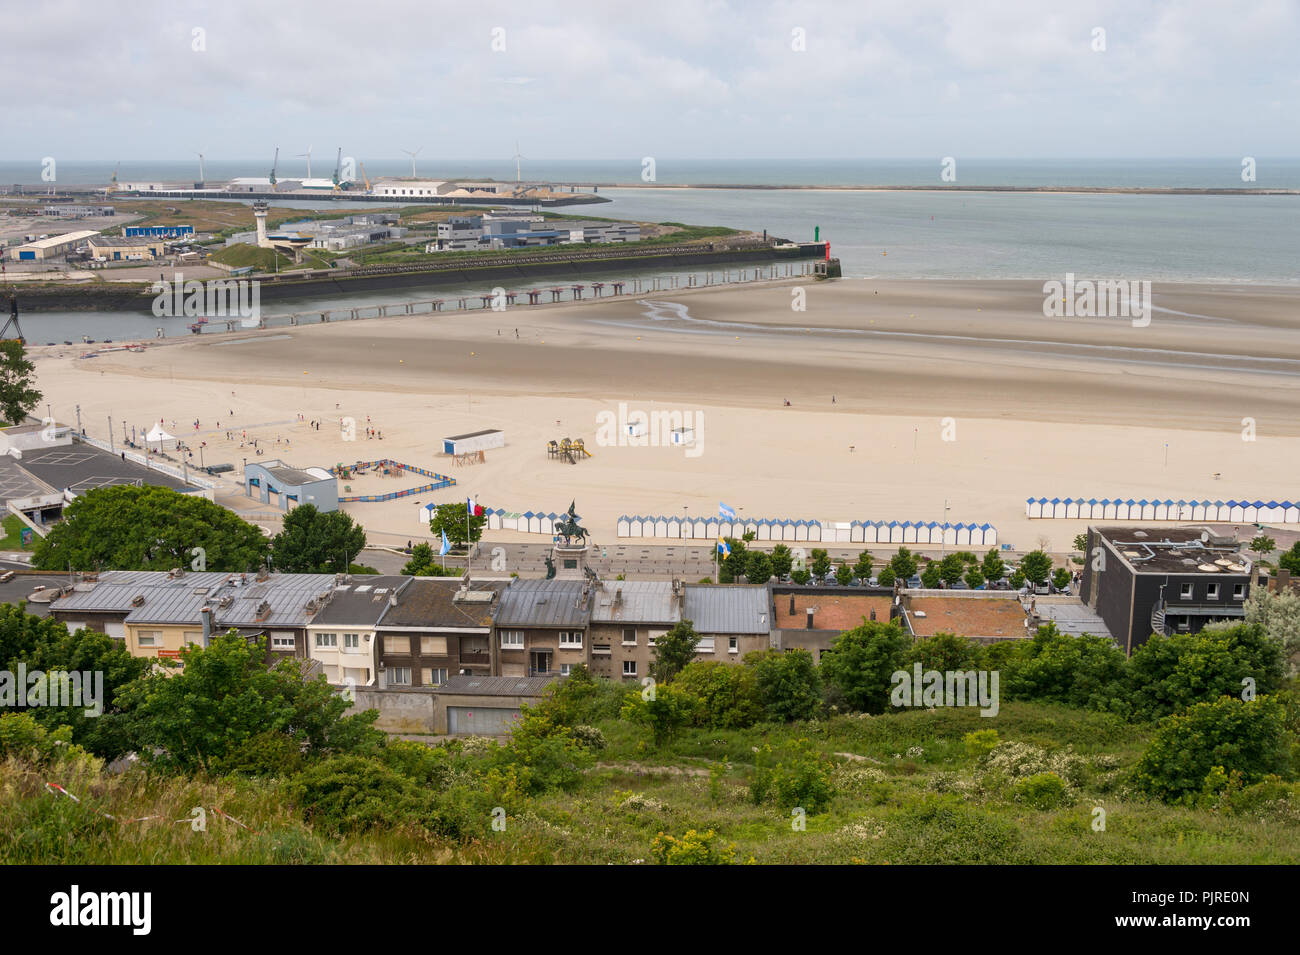 Boulogne-sur-Mer, France - 16 June 2018: Top view of the harbor and the beach. Stock Photo